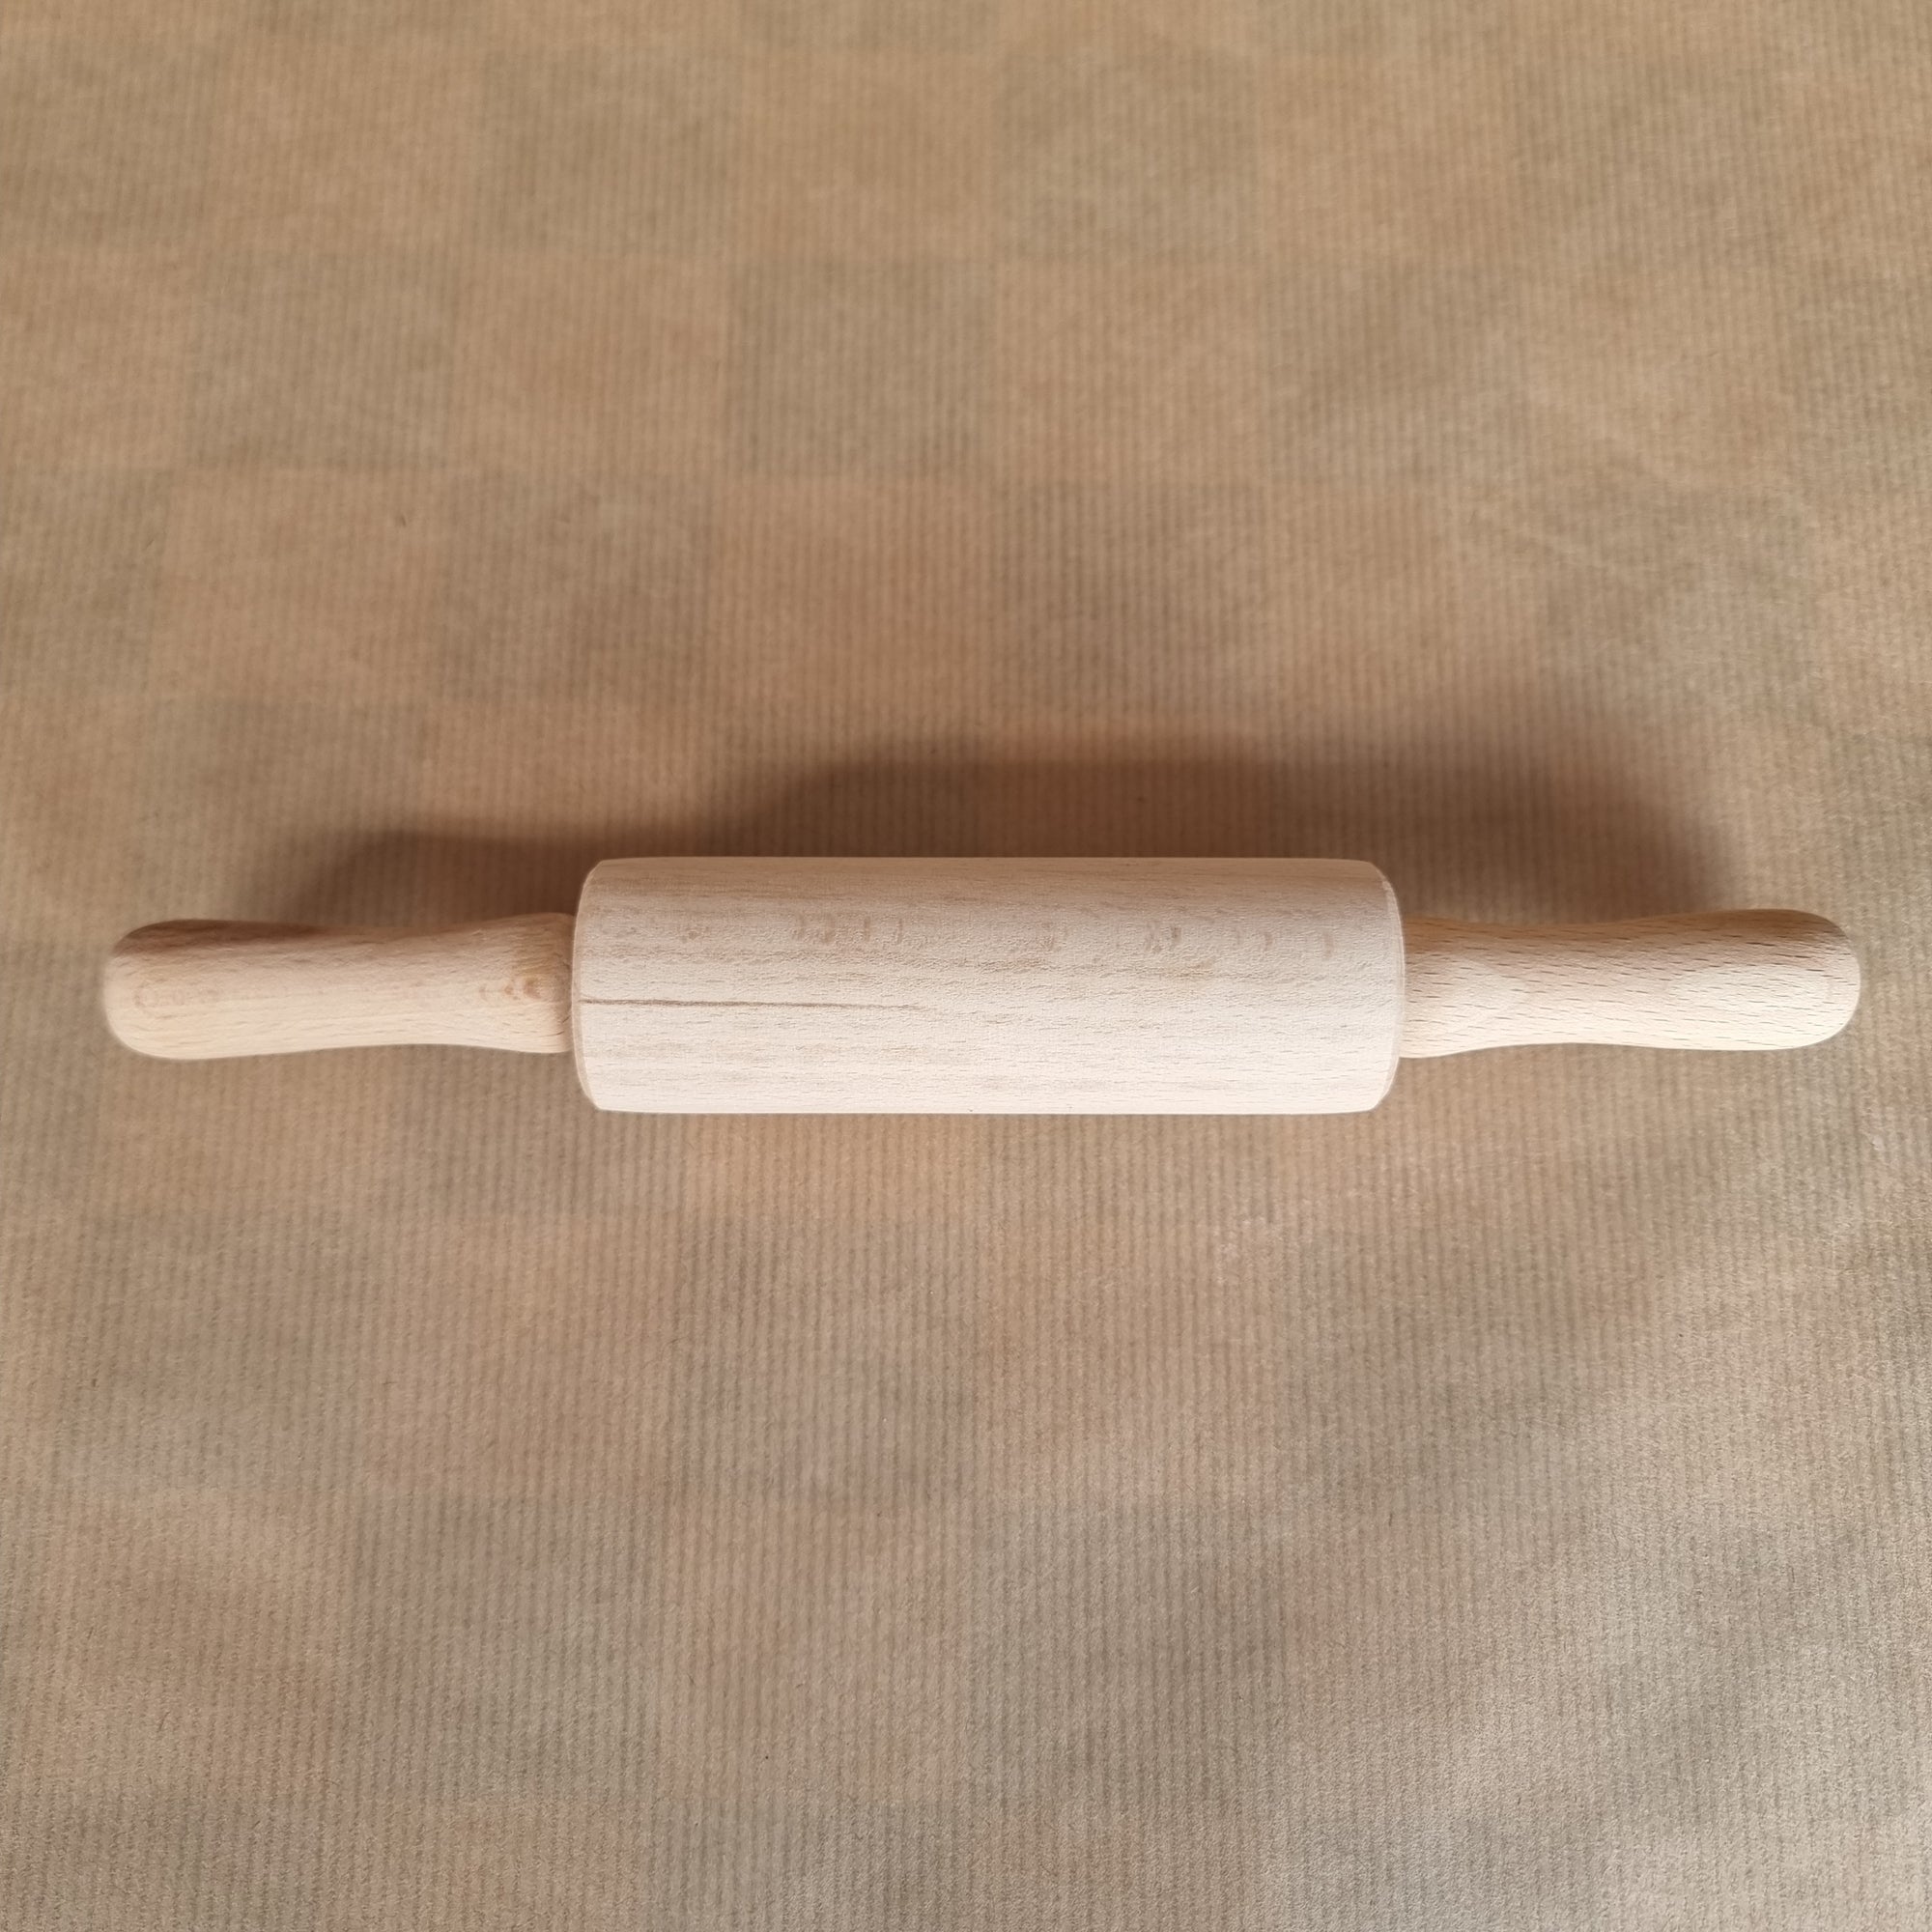 Mini Wooden Rolling Pin with Handles